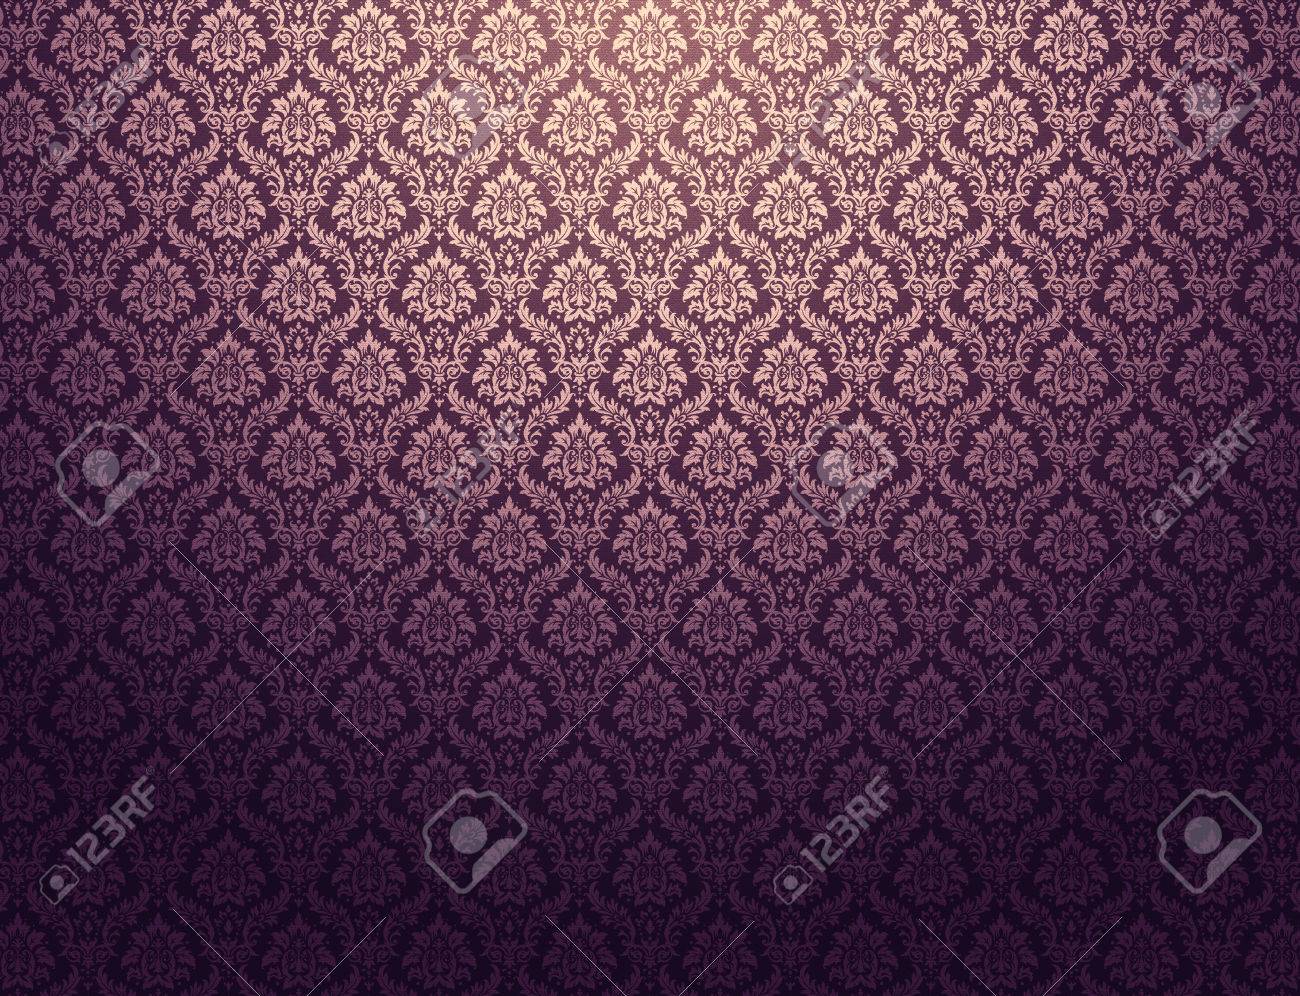 Purple Damask Wallpaper With Golden Floral Patterns Stock Photo